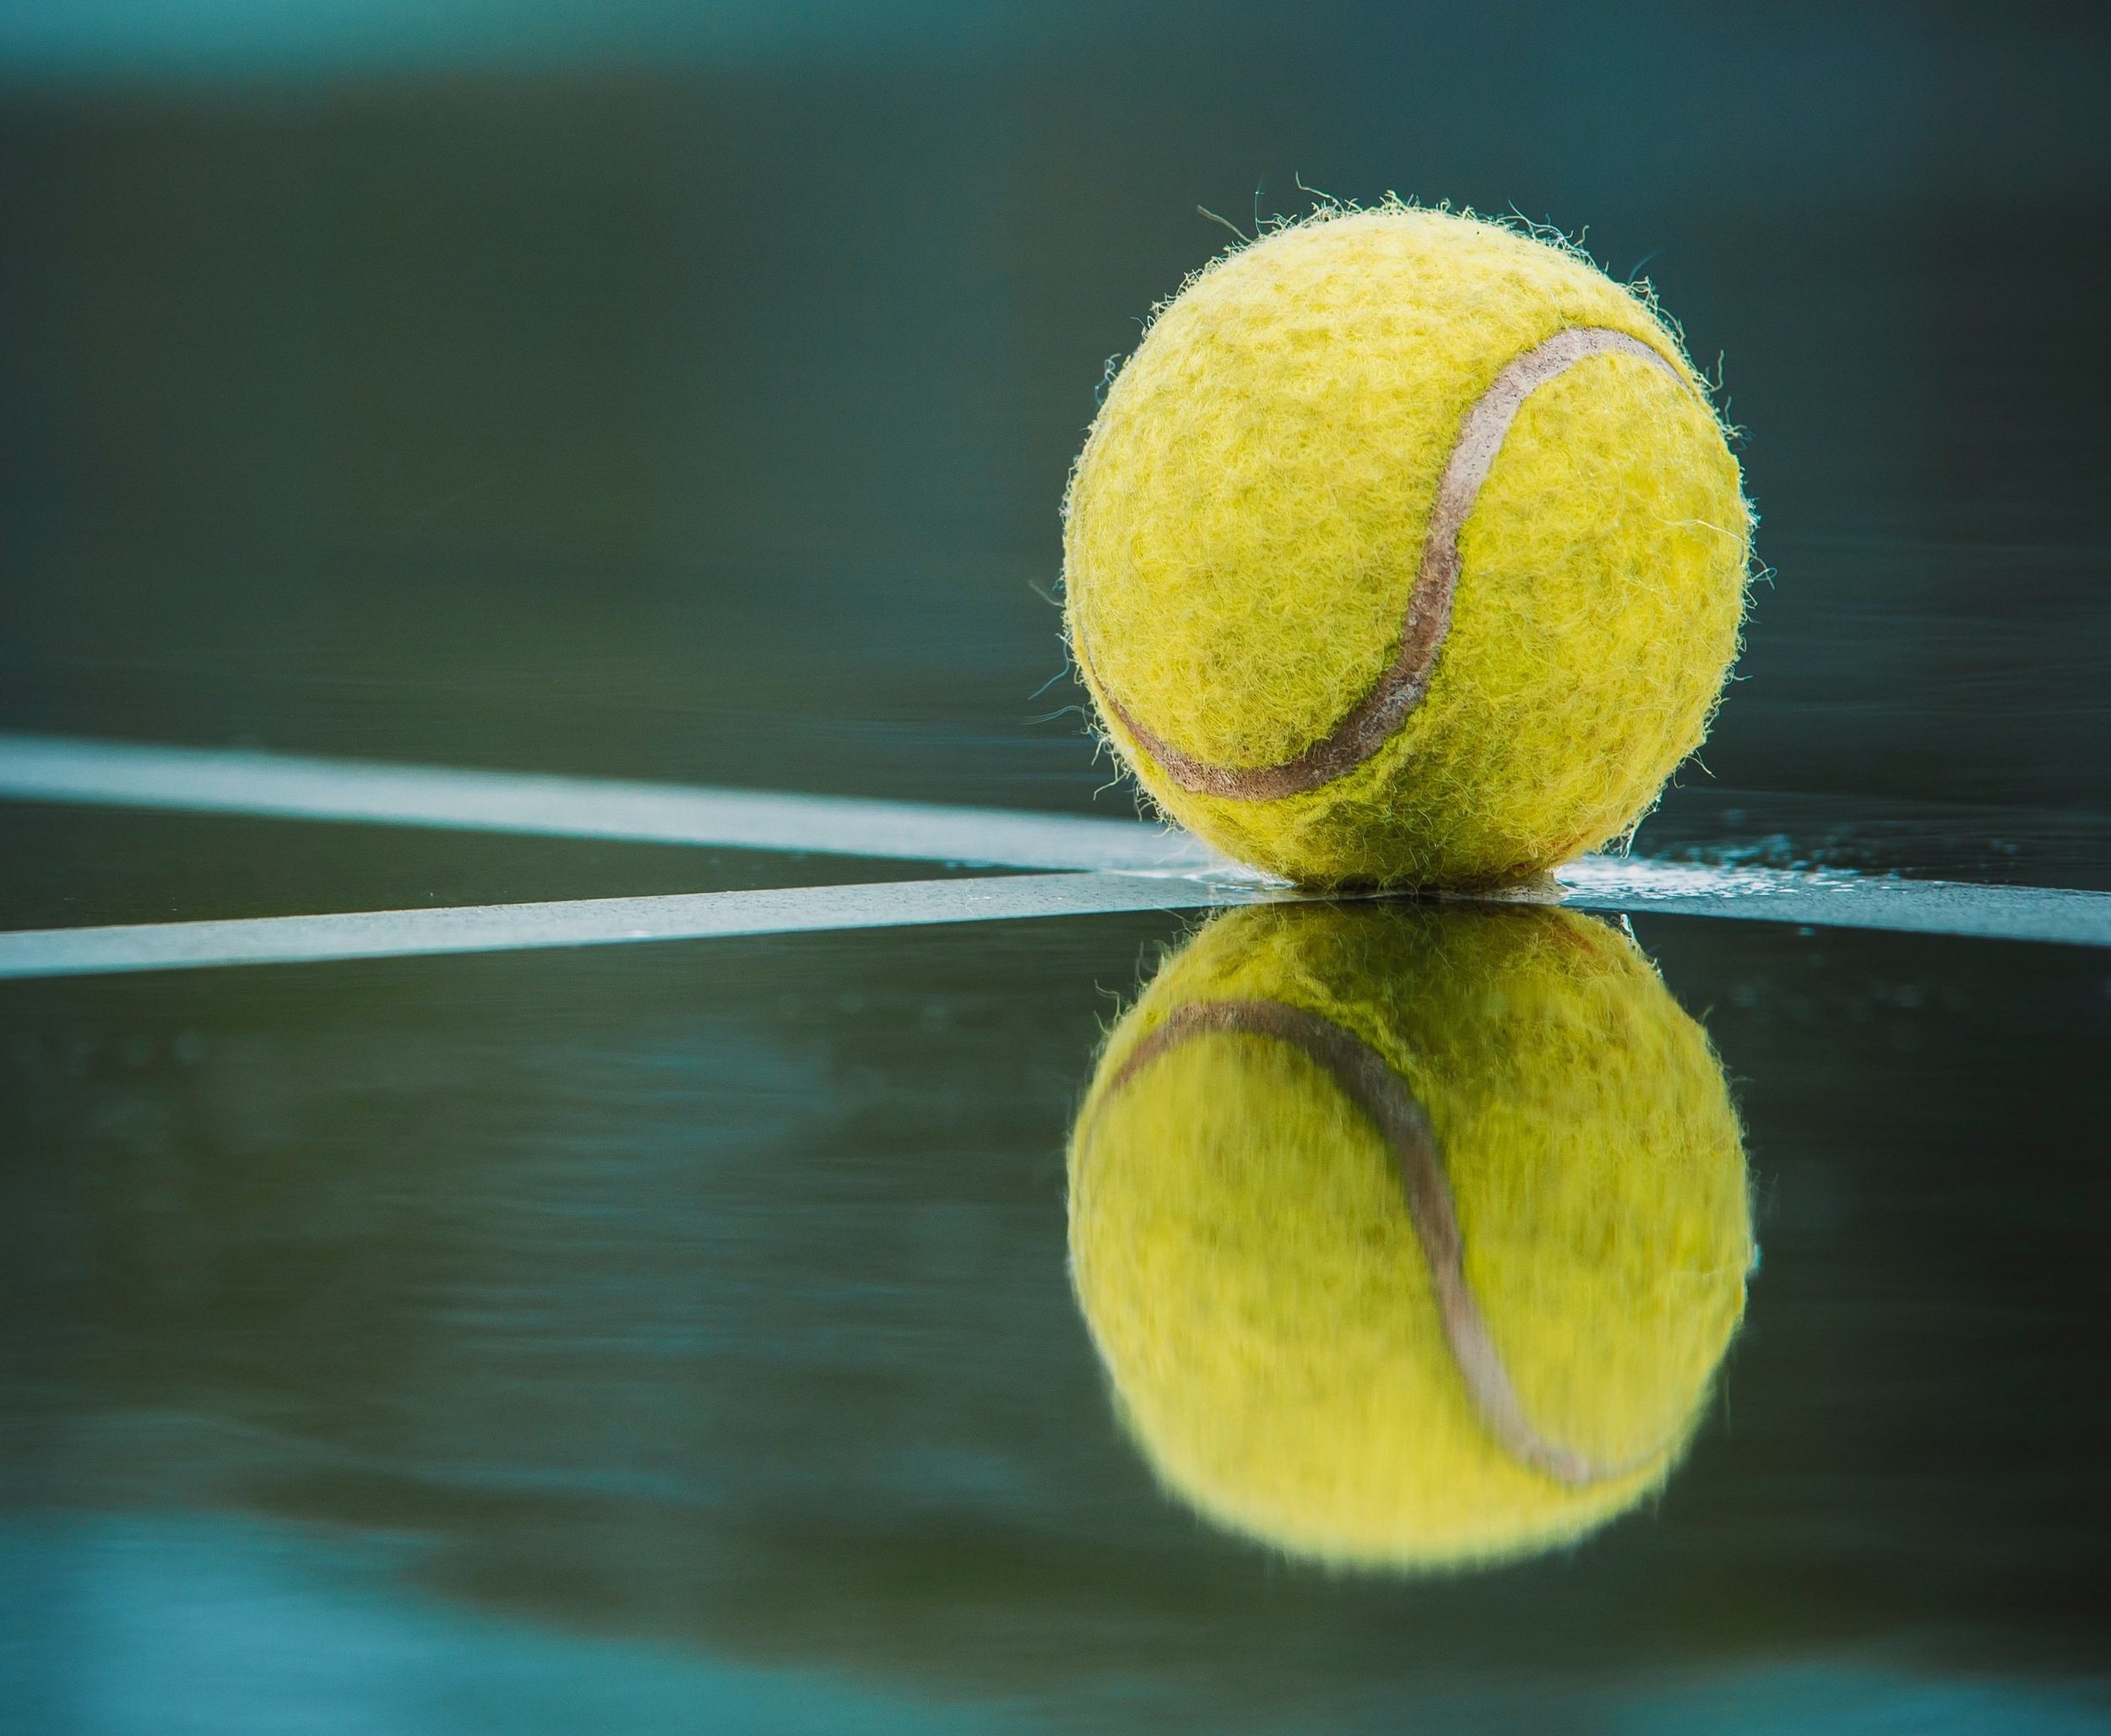 A guide to playing tennis in London